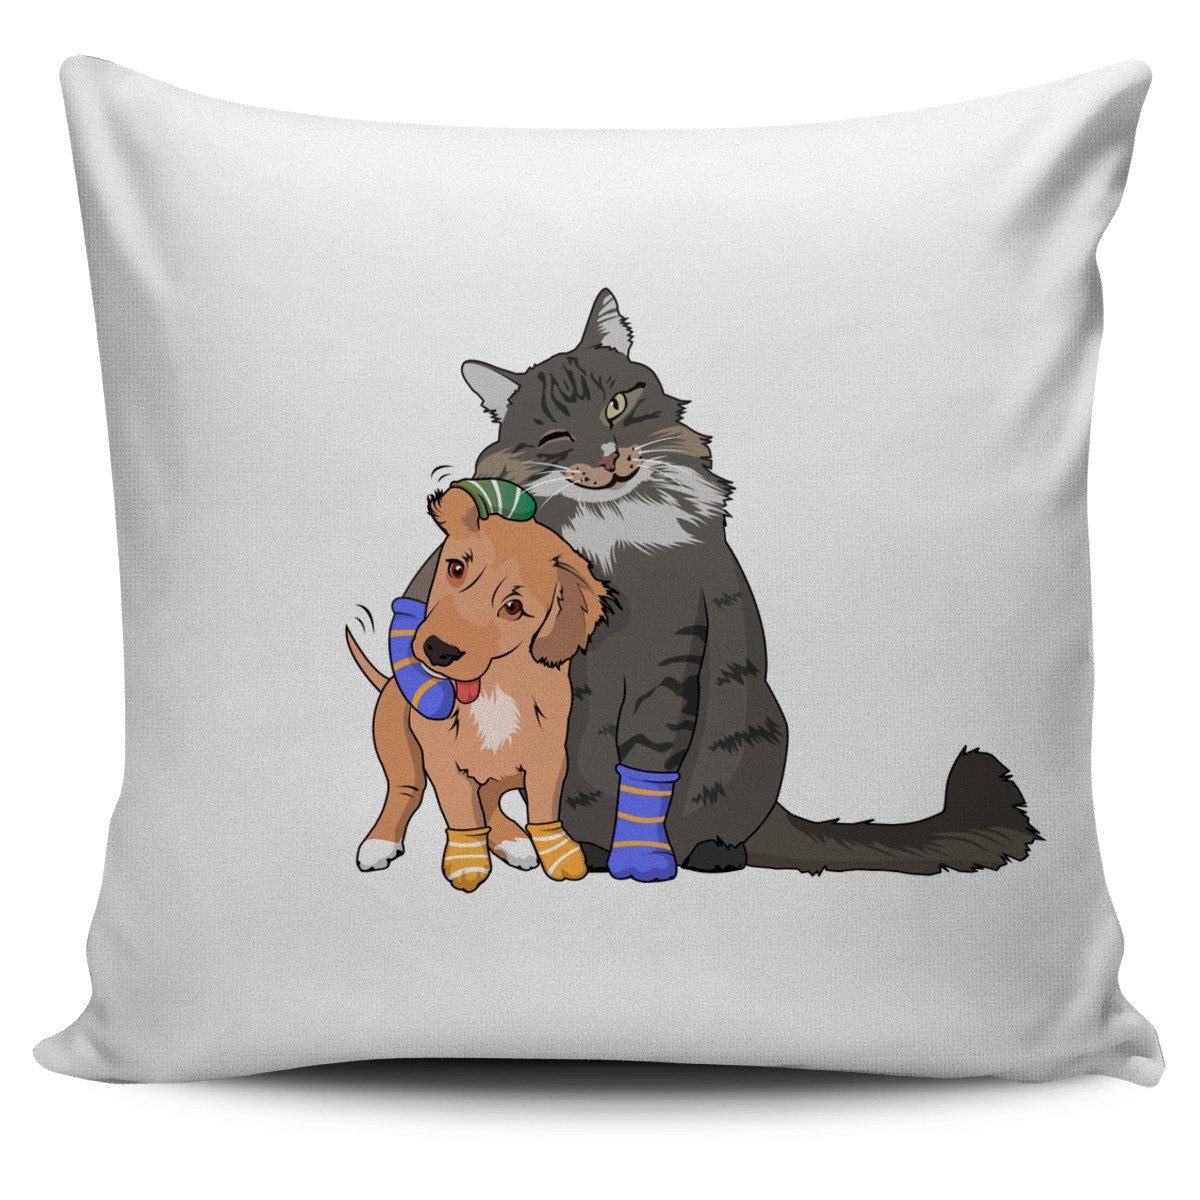 Pillow Cover - Cat and Dog Hug